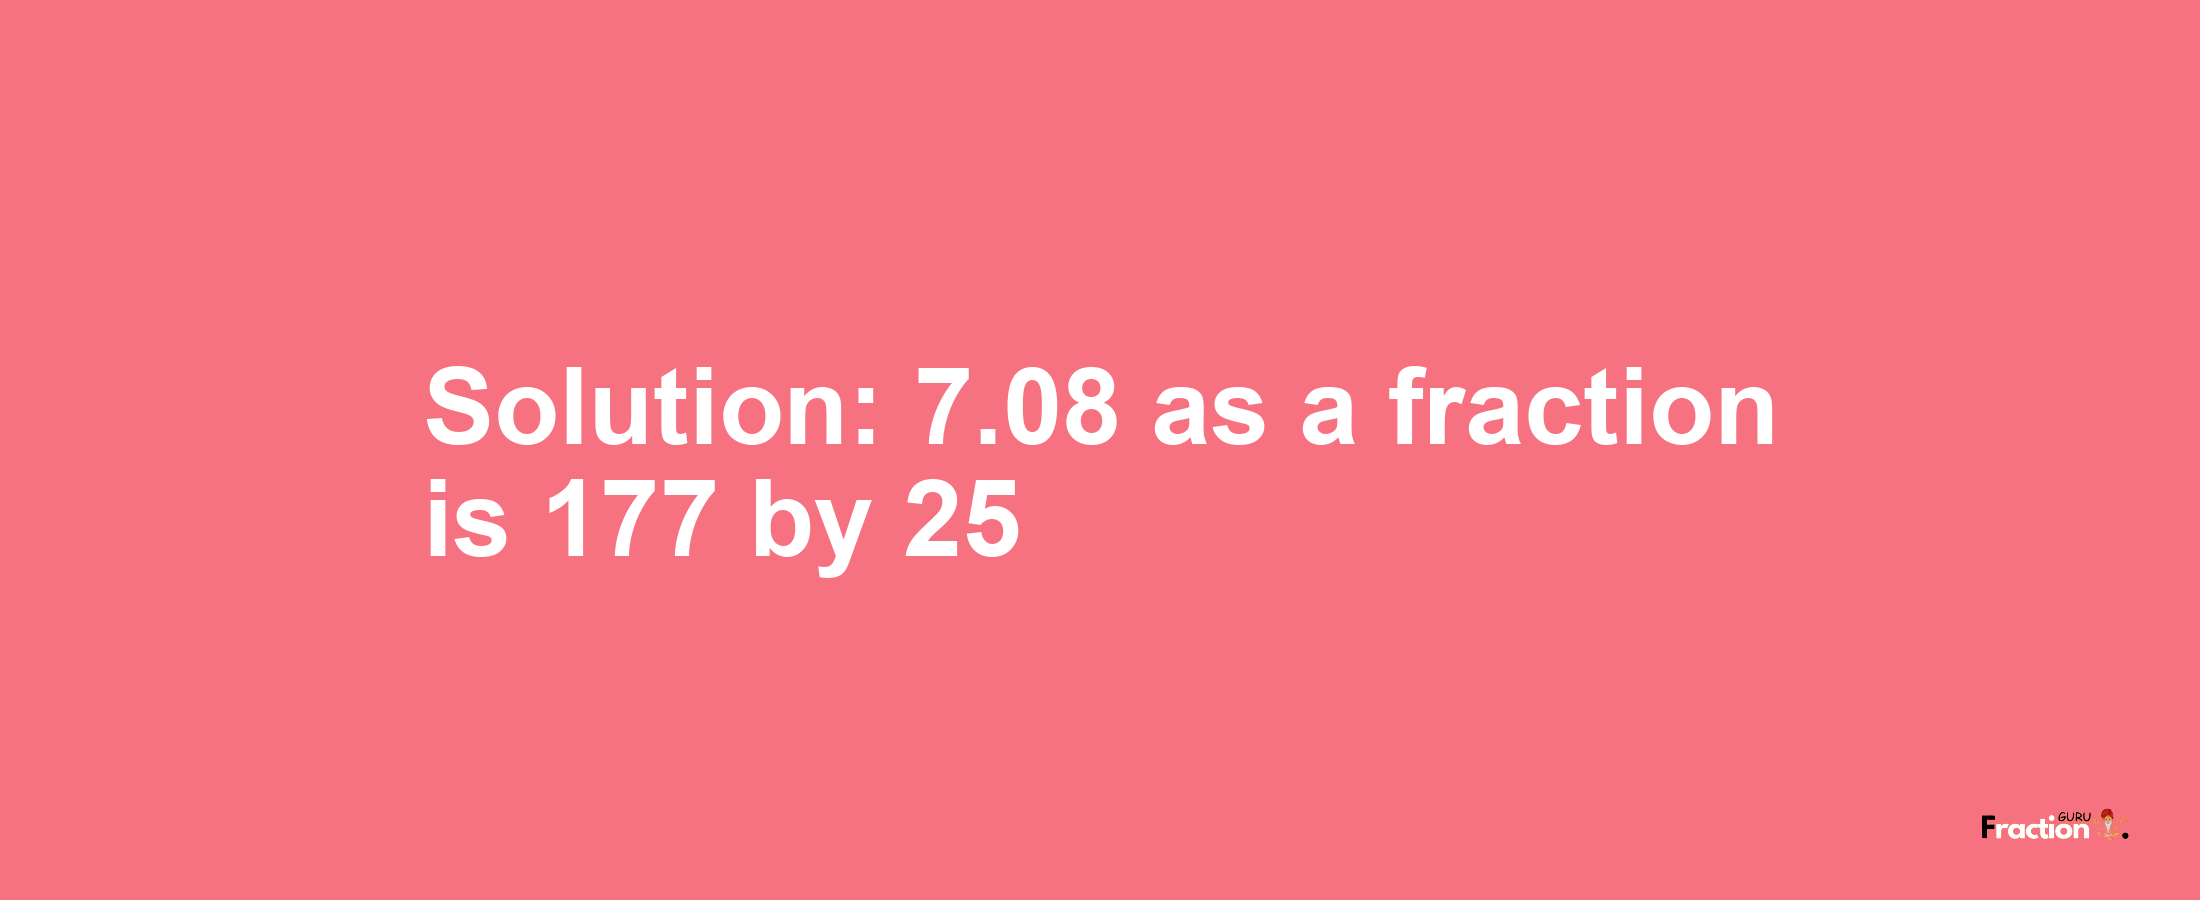 Solution:7.08 as a fraction is 177/25